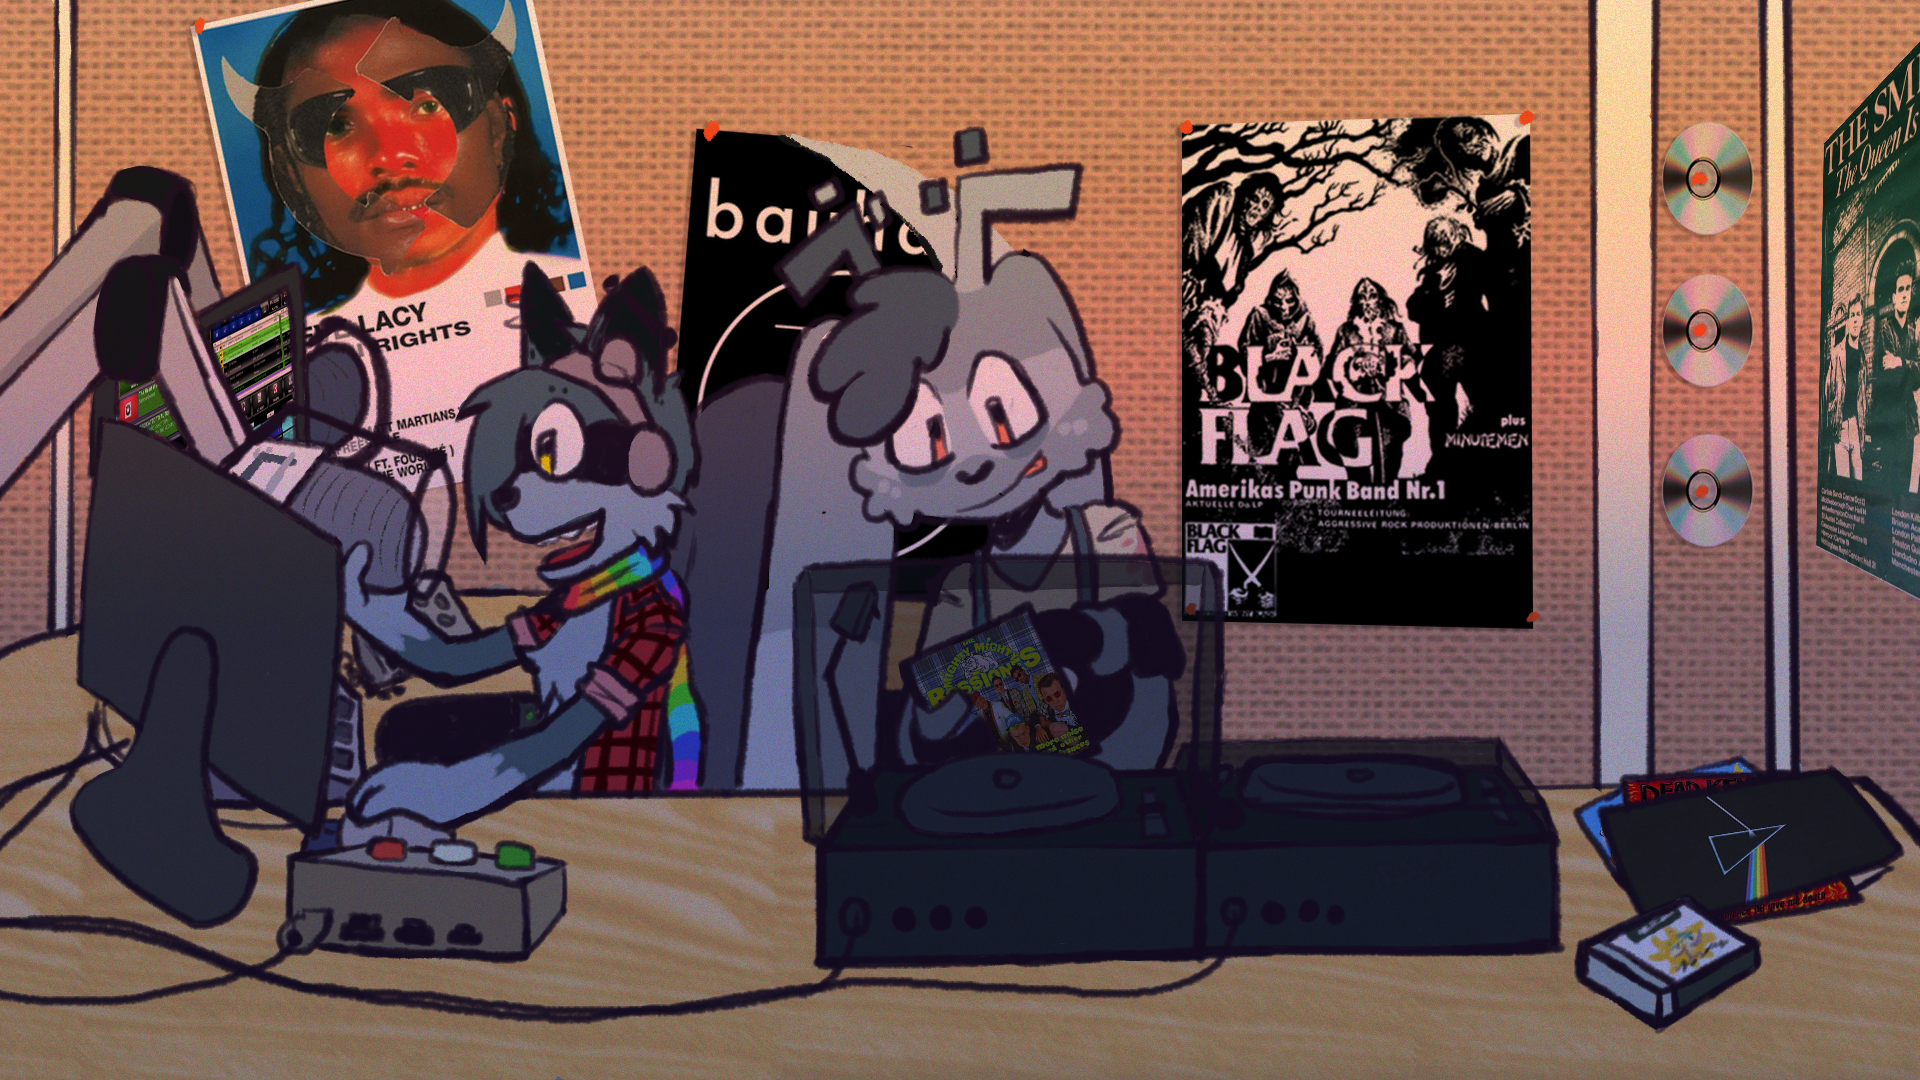 current sheezyart mascot sheemz (jackalope in white shirt) and past sheezyart mascot dante (raccoon with scarf and plaid shirt) inside a radio station. sheemz is holding a Mighty Mighty Bosstones record, getting ready to put it in a record player, while dante is speaking into a microphone to the audience while on air. various music posters and a few cds are scattered around the studio.